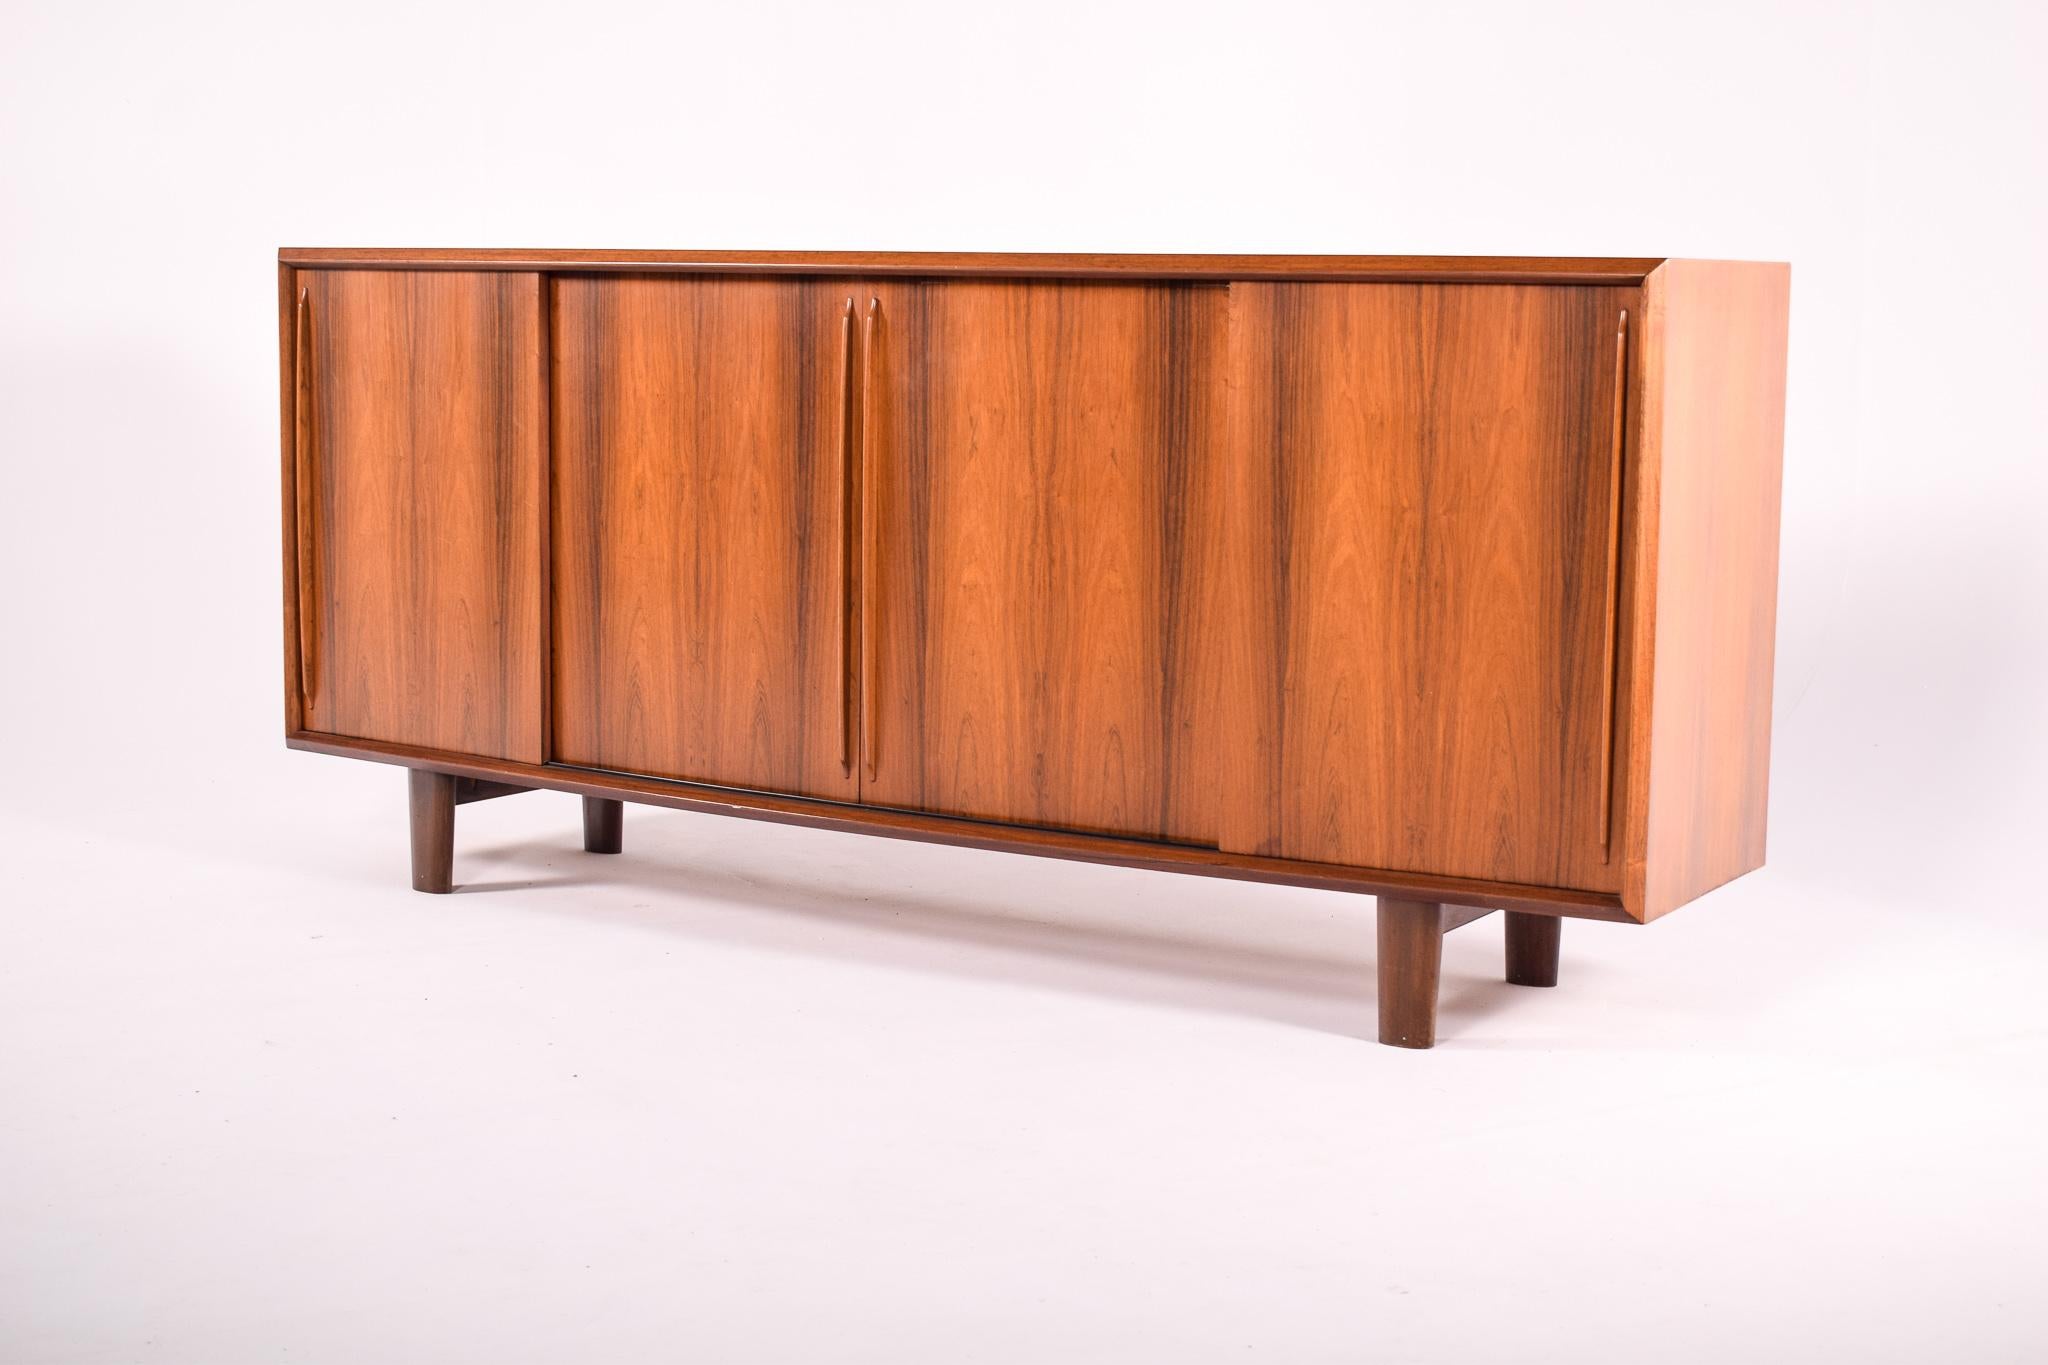 This sideboard, designed by H.P. Hansen, is an exquisite piece that embodies the union of form and function, a characteristic hallmark of mid-century furniture design. The clean lines and the rich warmth of the wood highlight Hansen's attention to